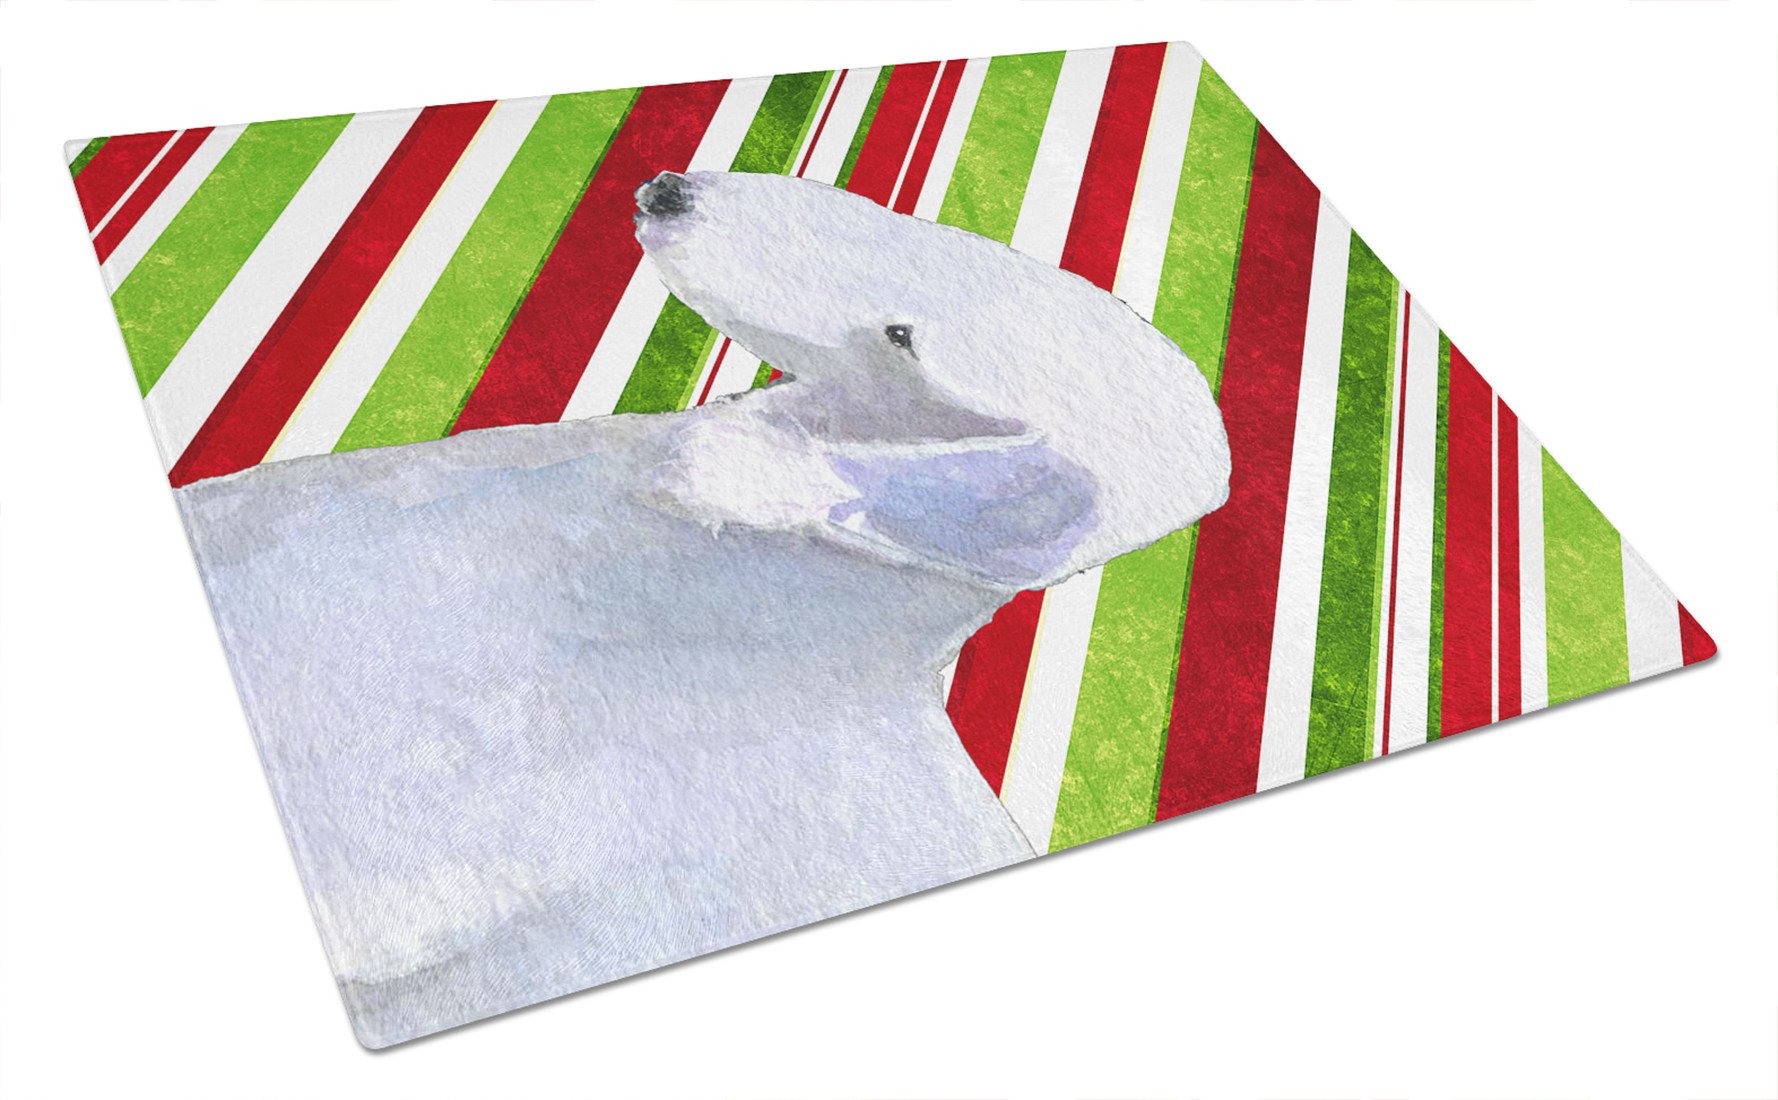 Bedlington Terrier Candy Cane Holiday Christmas Glass Cutting Board Large by Caroline's Treasures